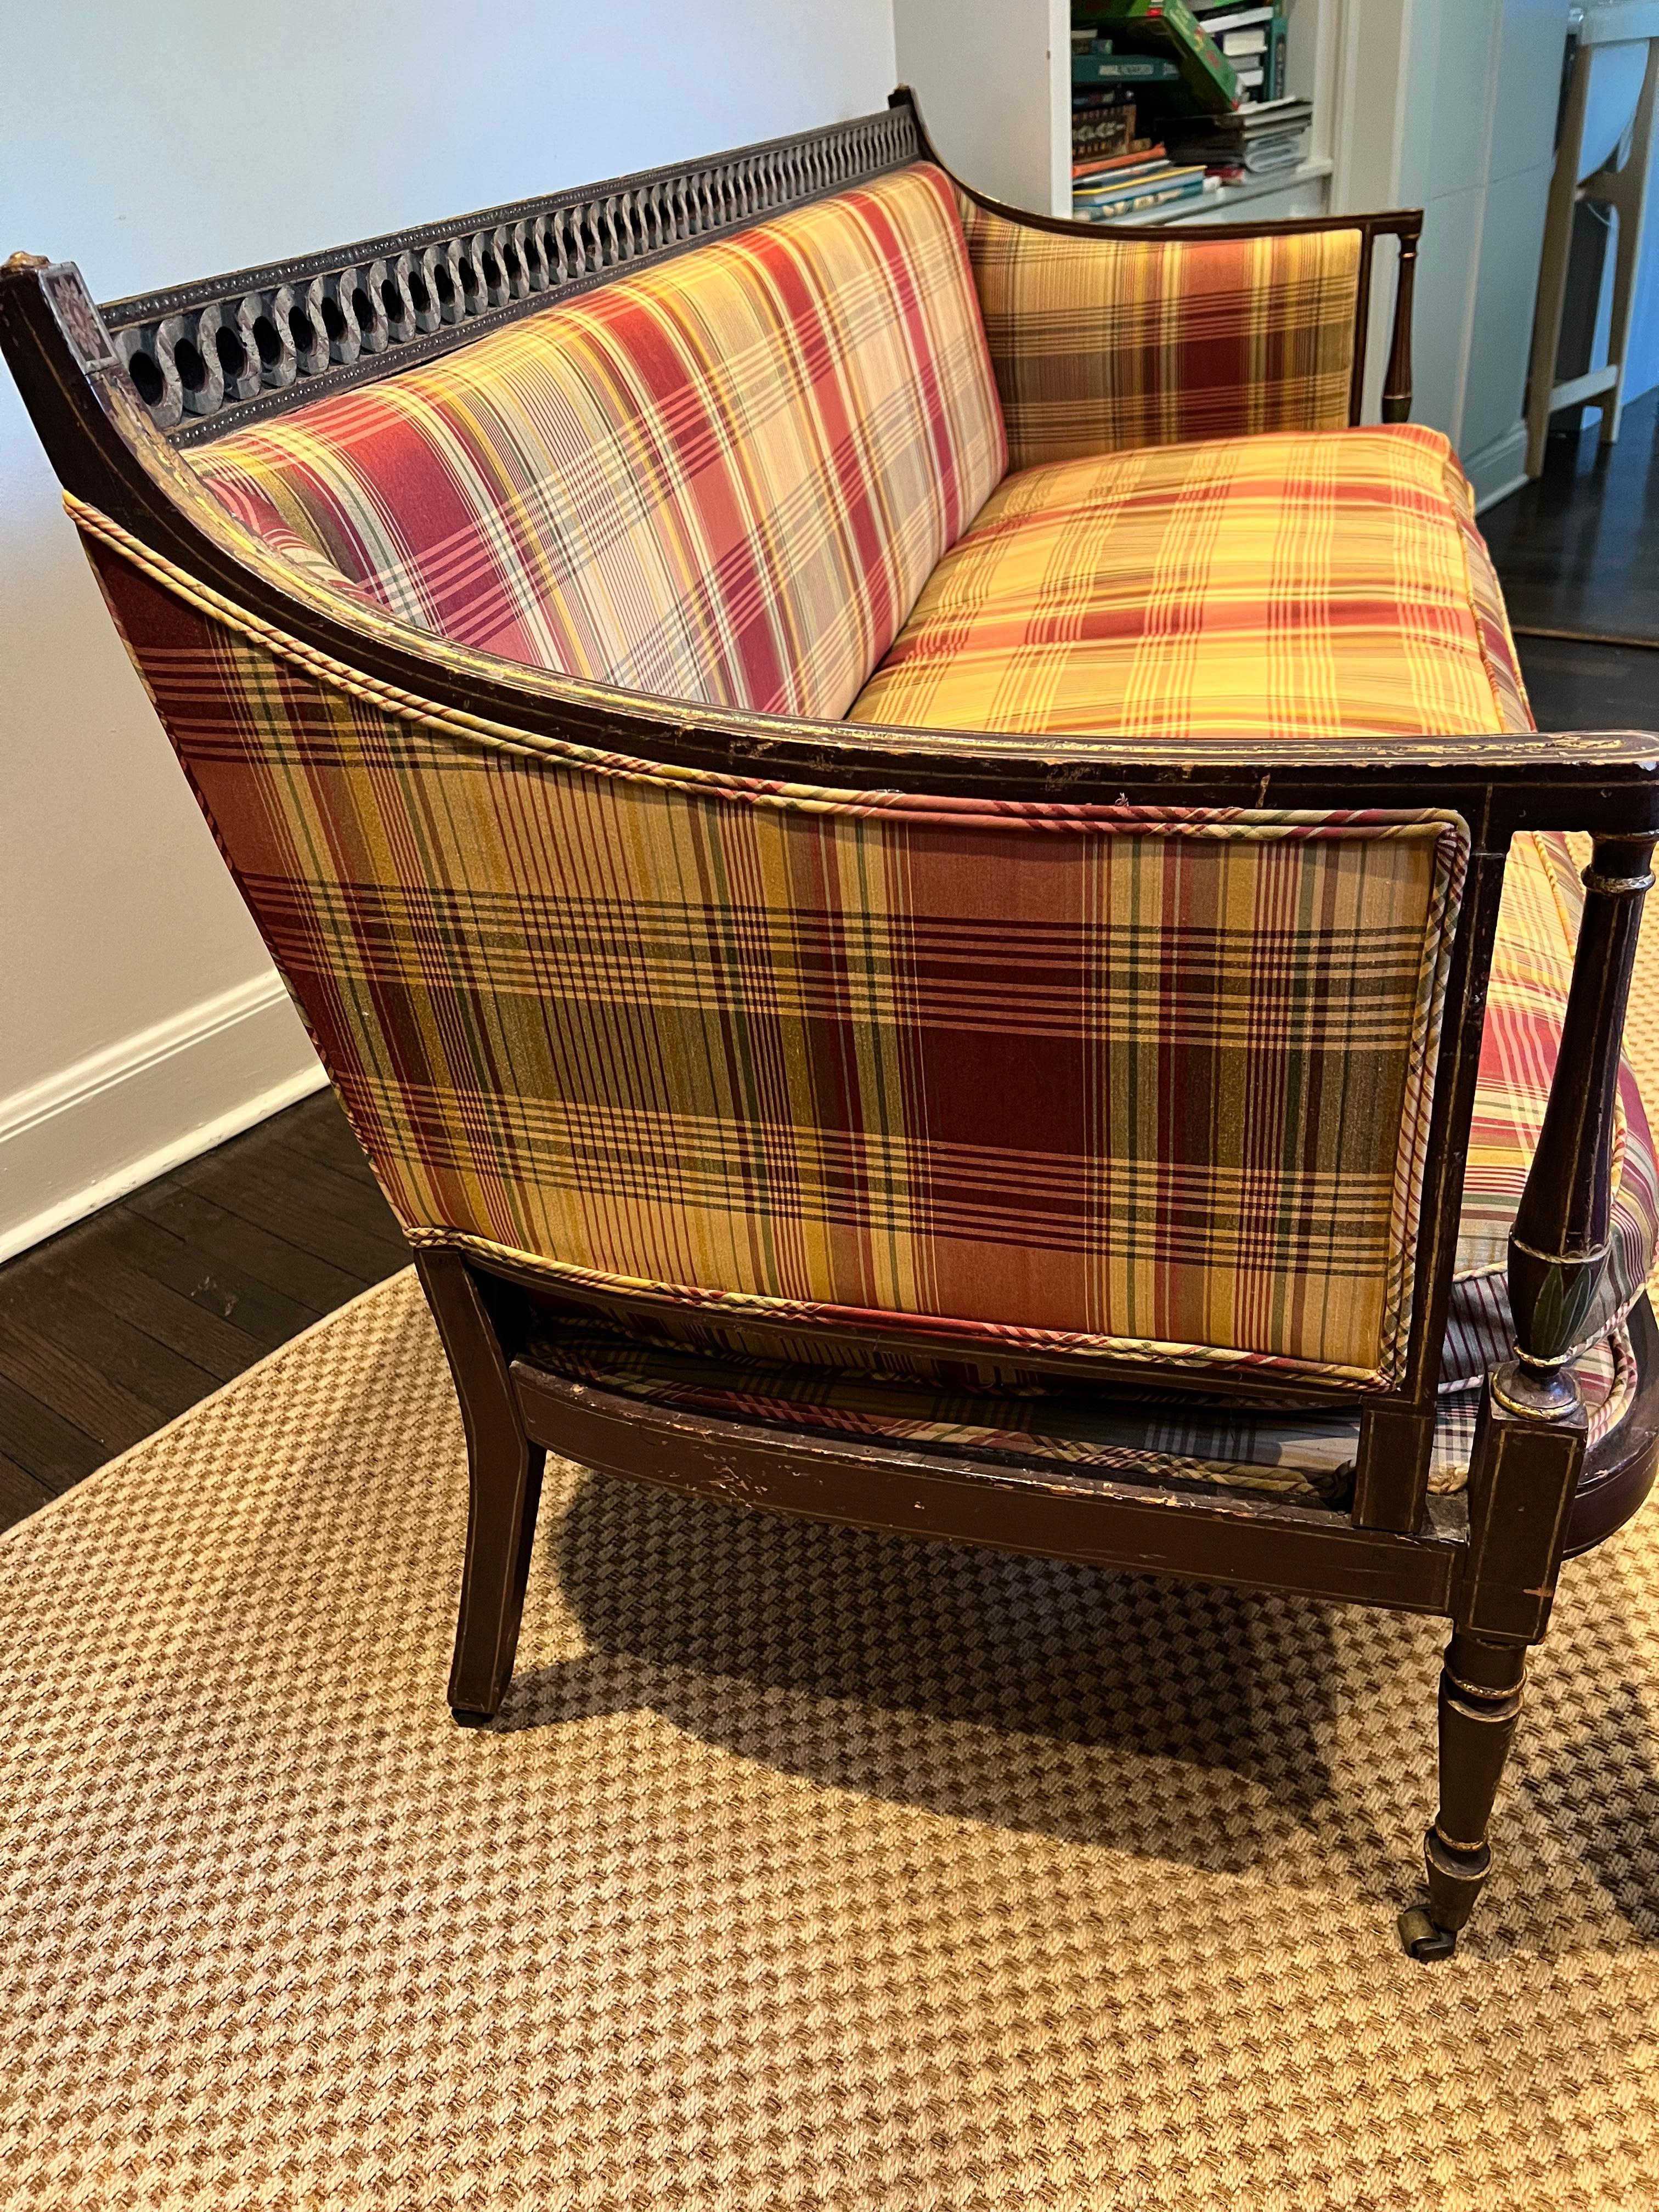 Cotton Antique Hand Painted Wood Setee with Open Fret Work & Plaid Upholstery For Sale